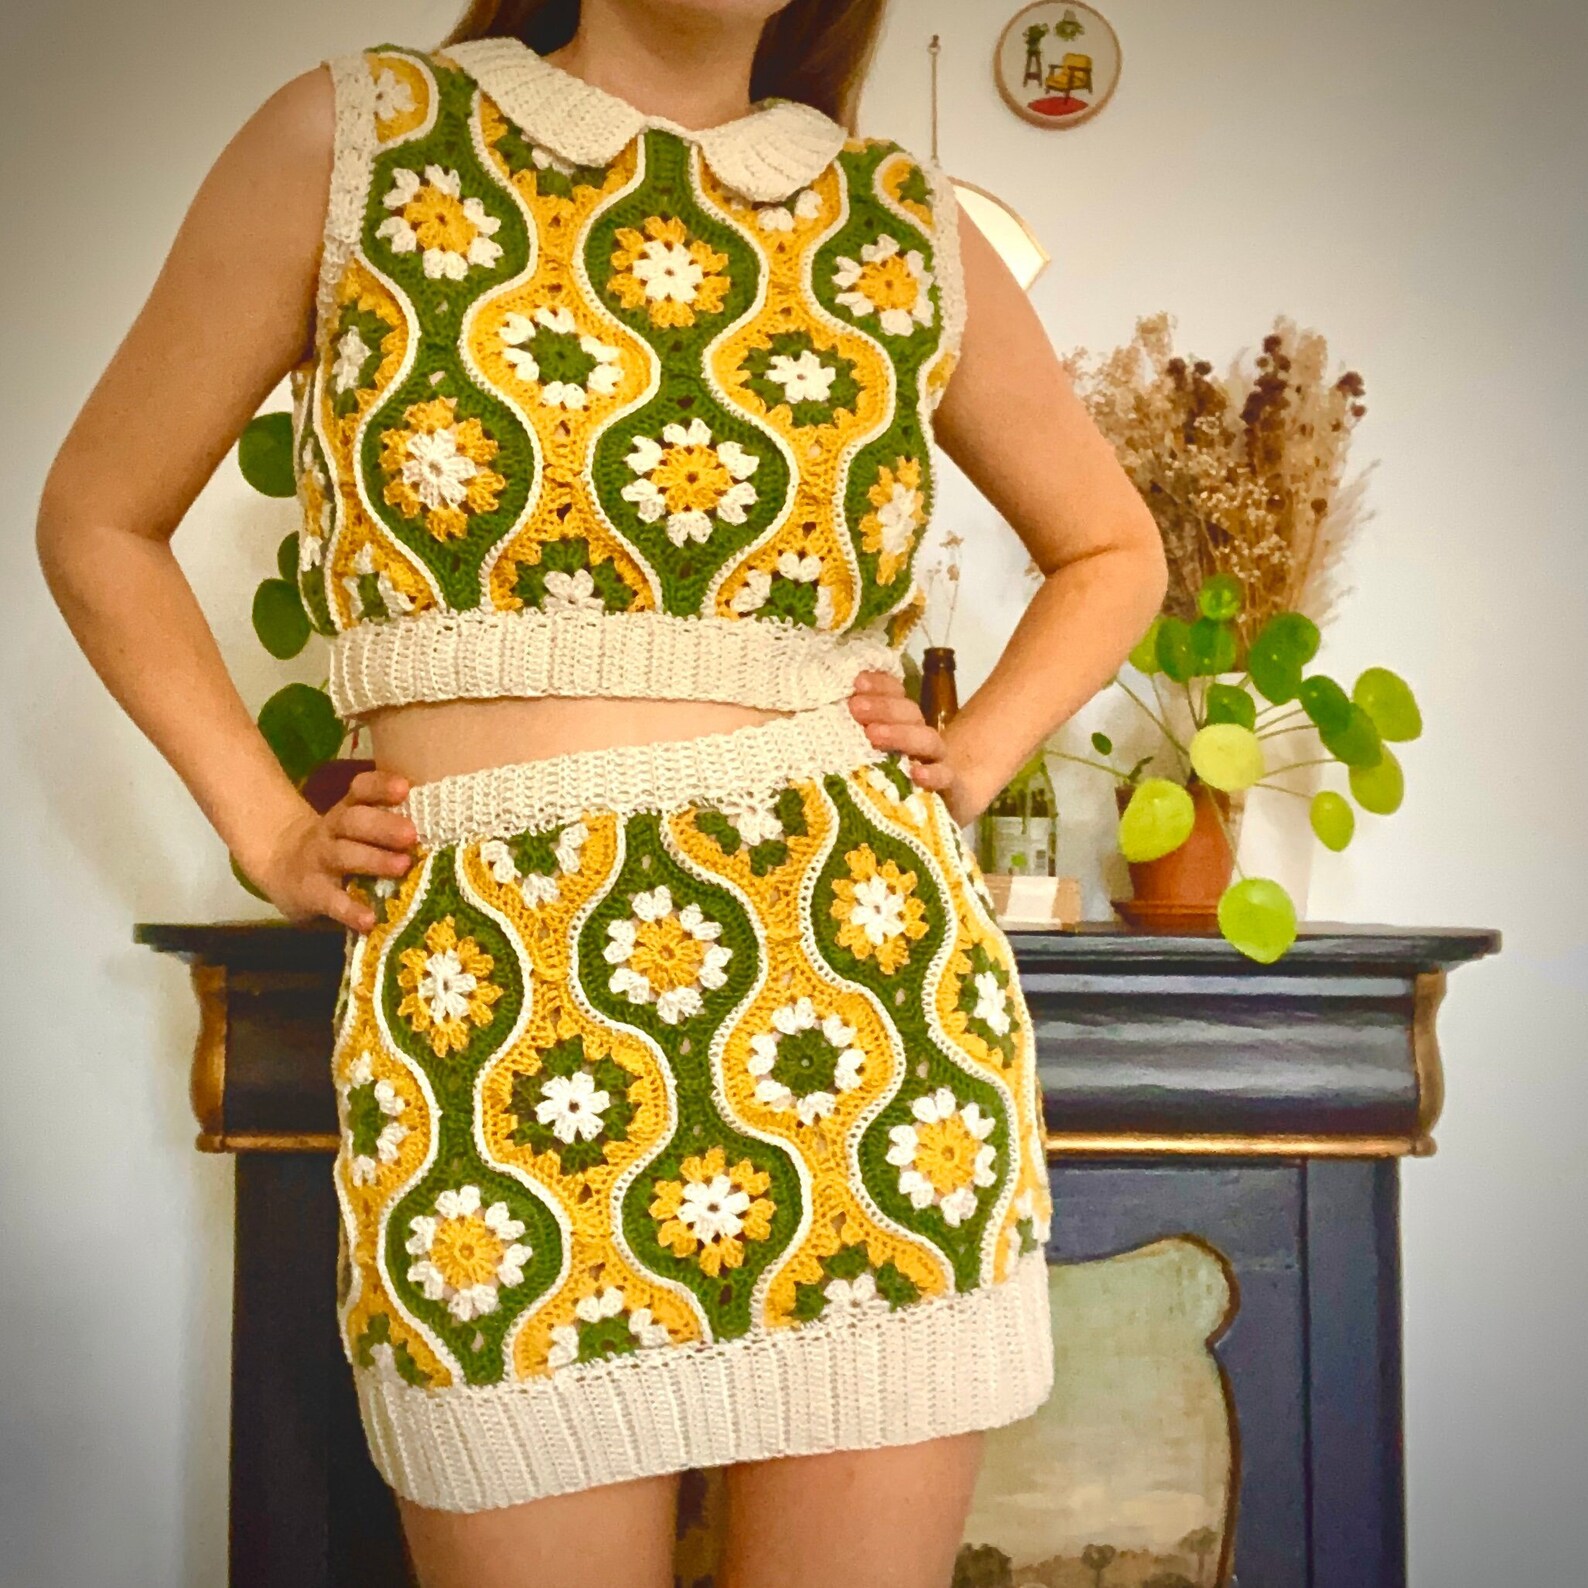 A green, yellow and white tank top and skirt. The design is very 70s with interlocking bubbled columns with flower-like shapes in the center of the bubbles.